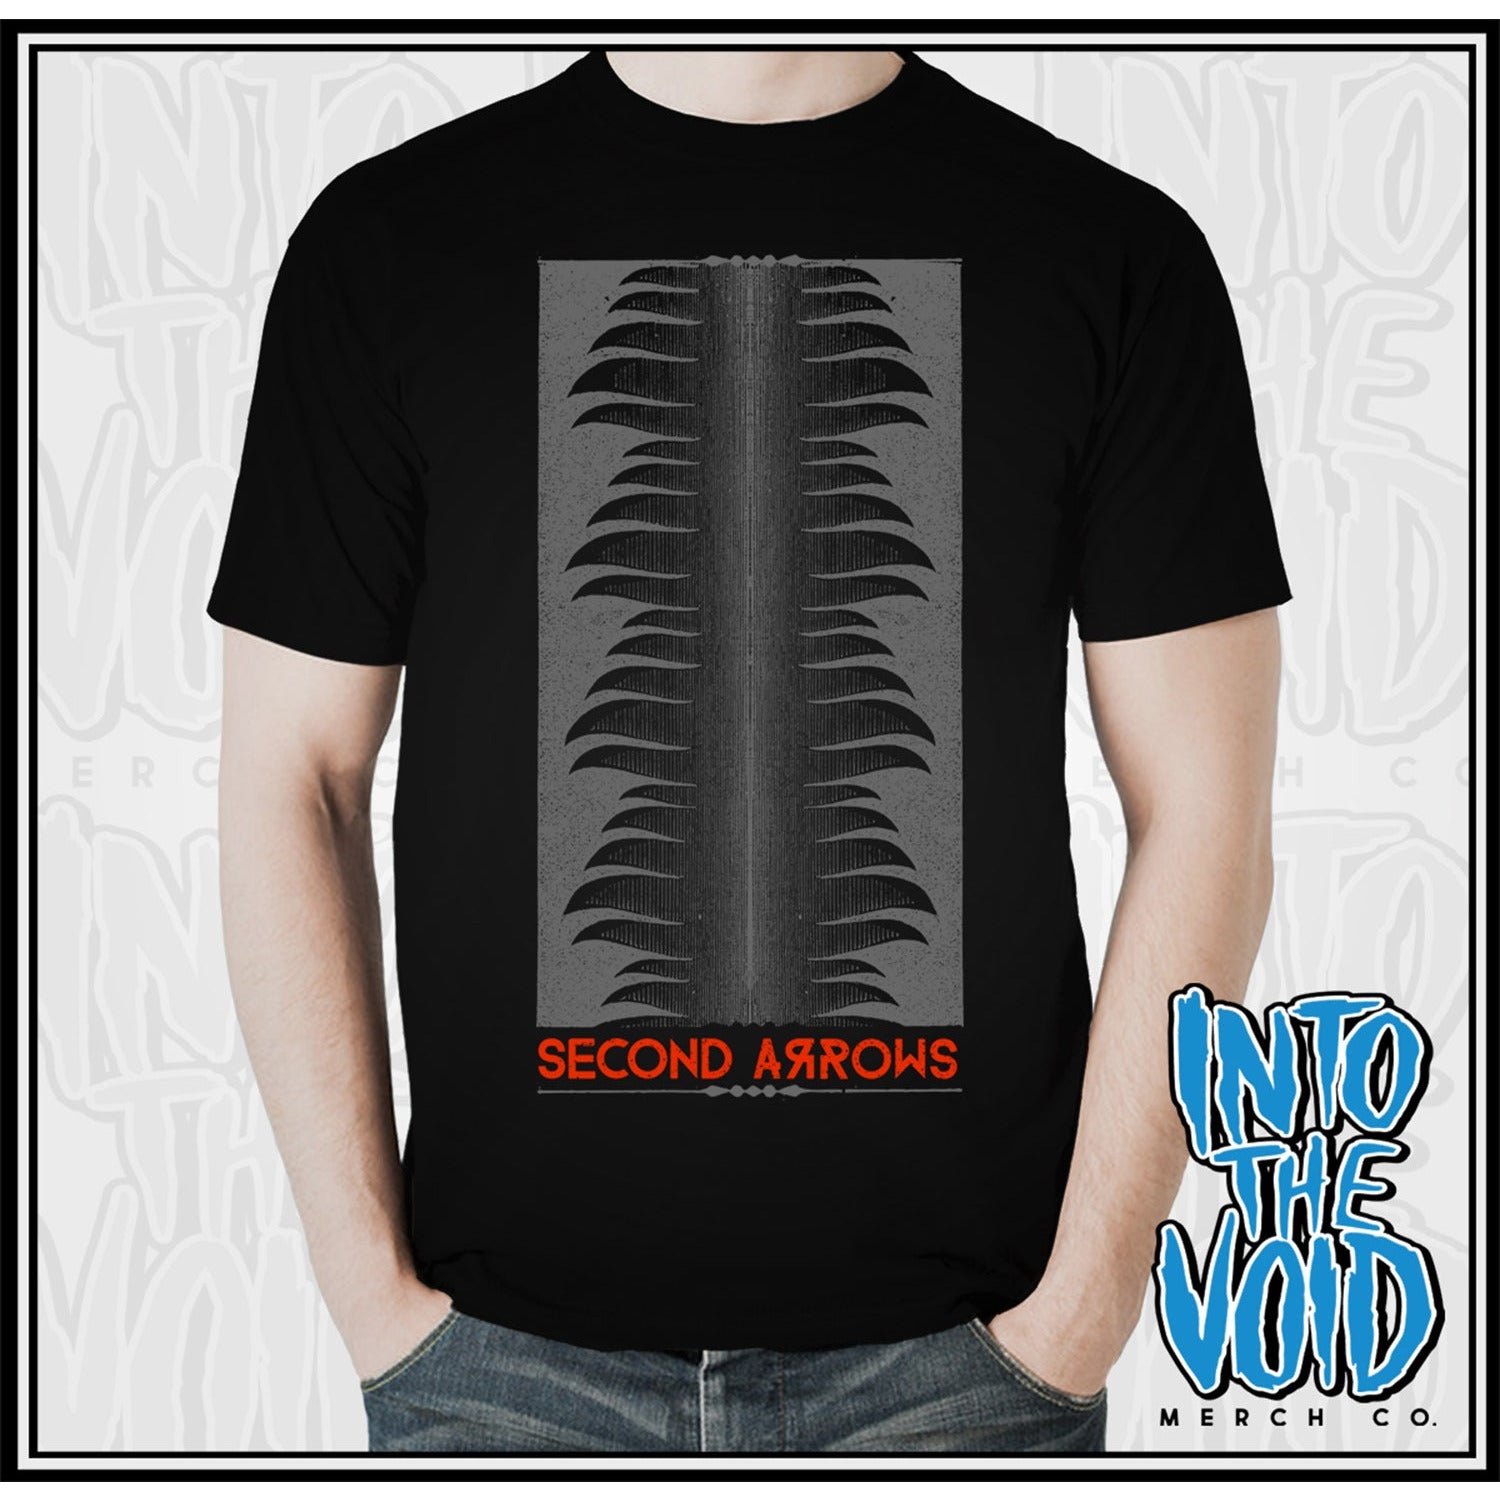 SECOND ARROWS - WAVES - Men's Short Sleeve T-Shirt - INTO THE VOID Merch Co.